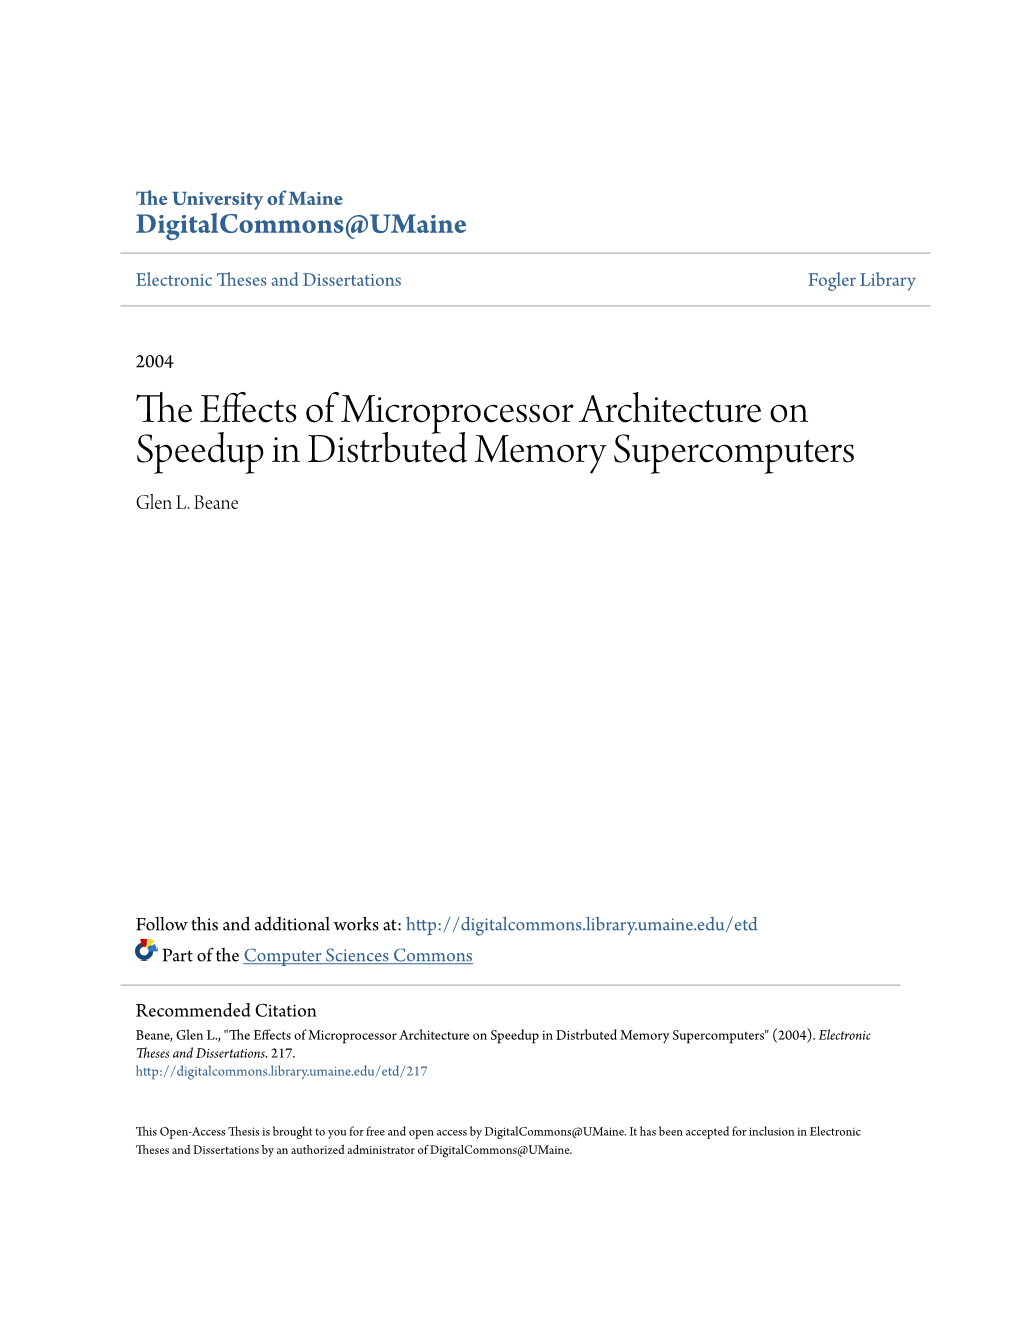 The Effects of Microprocessor Architecture on Speedup in Distrbuted Memory Supercomputers" (2004)